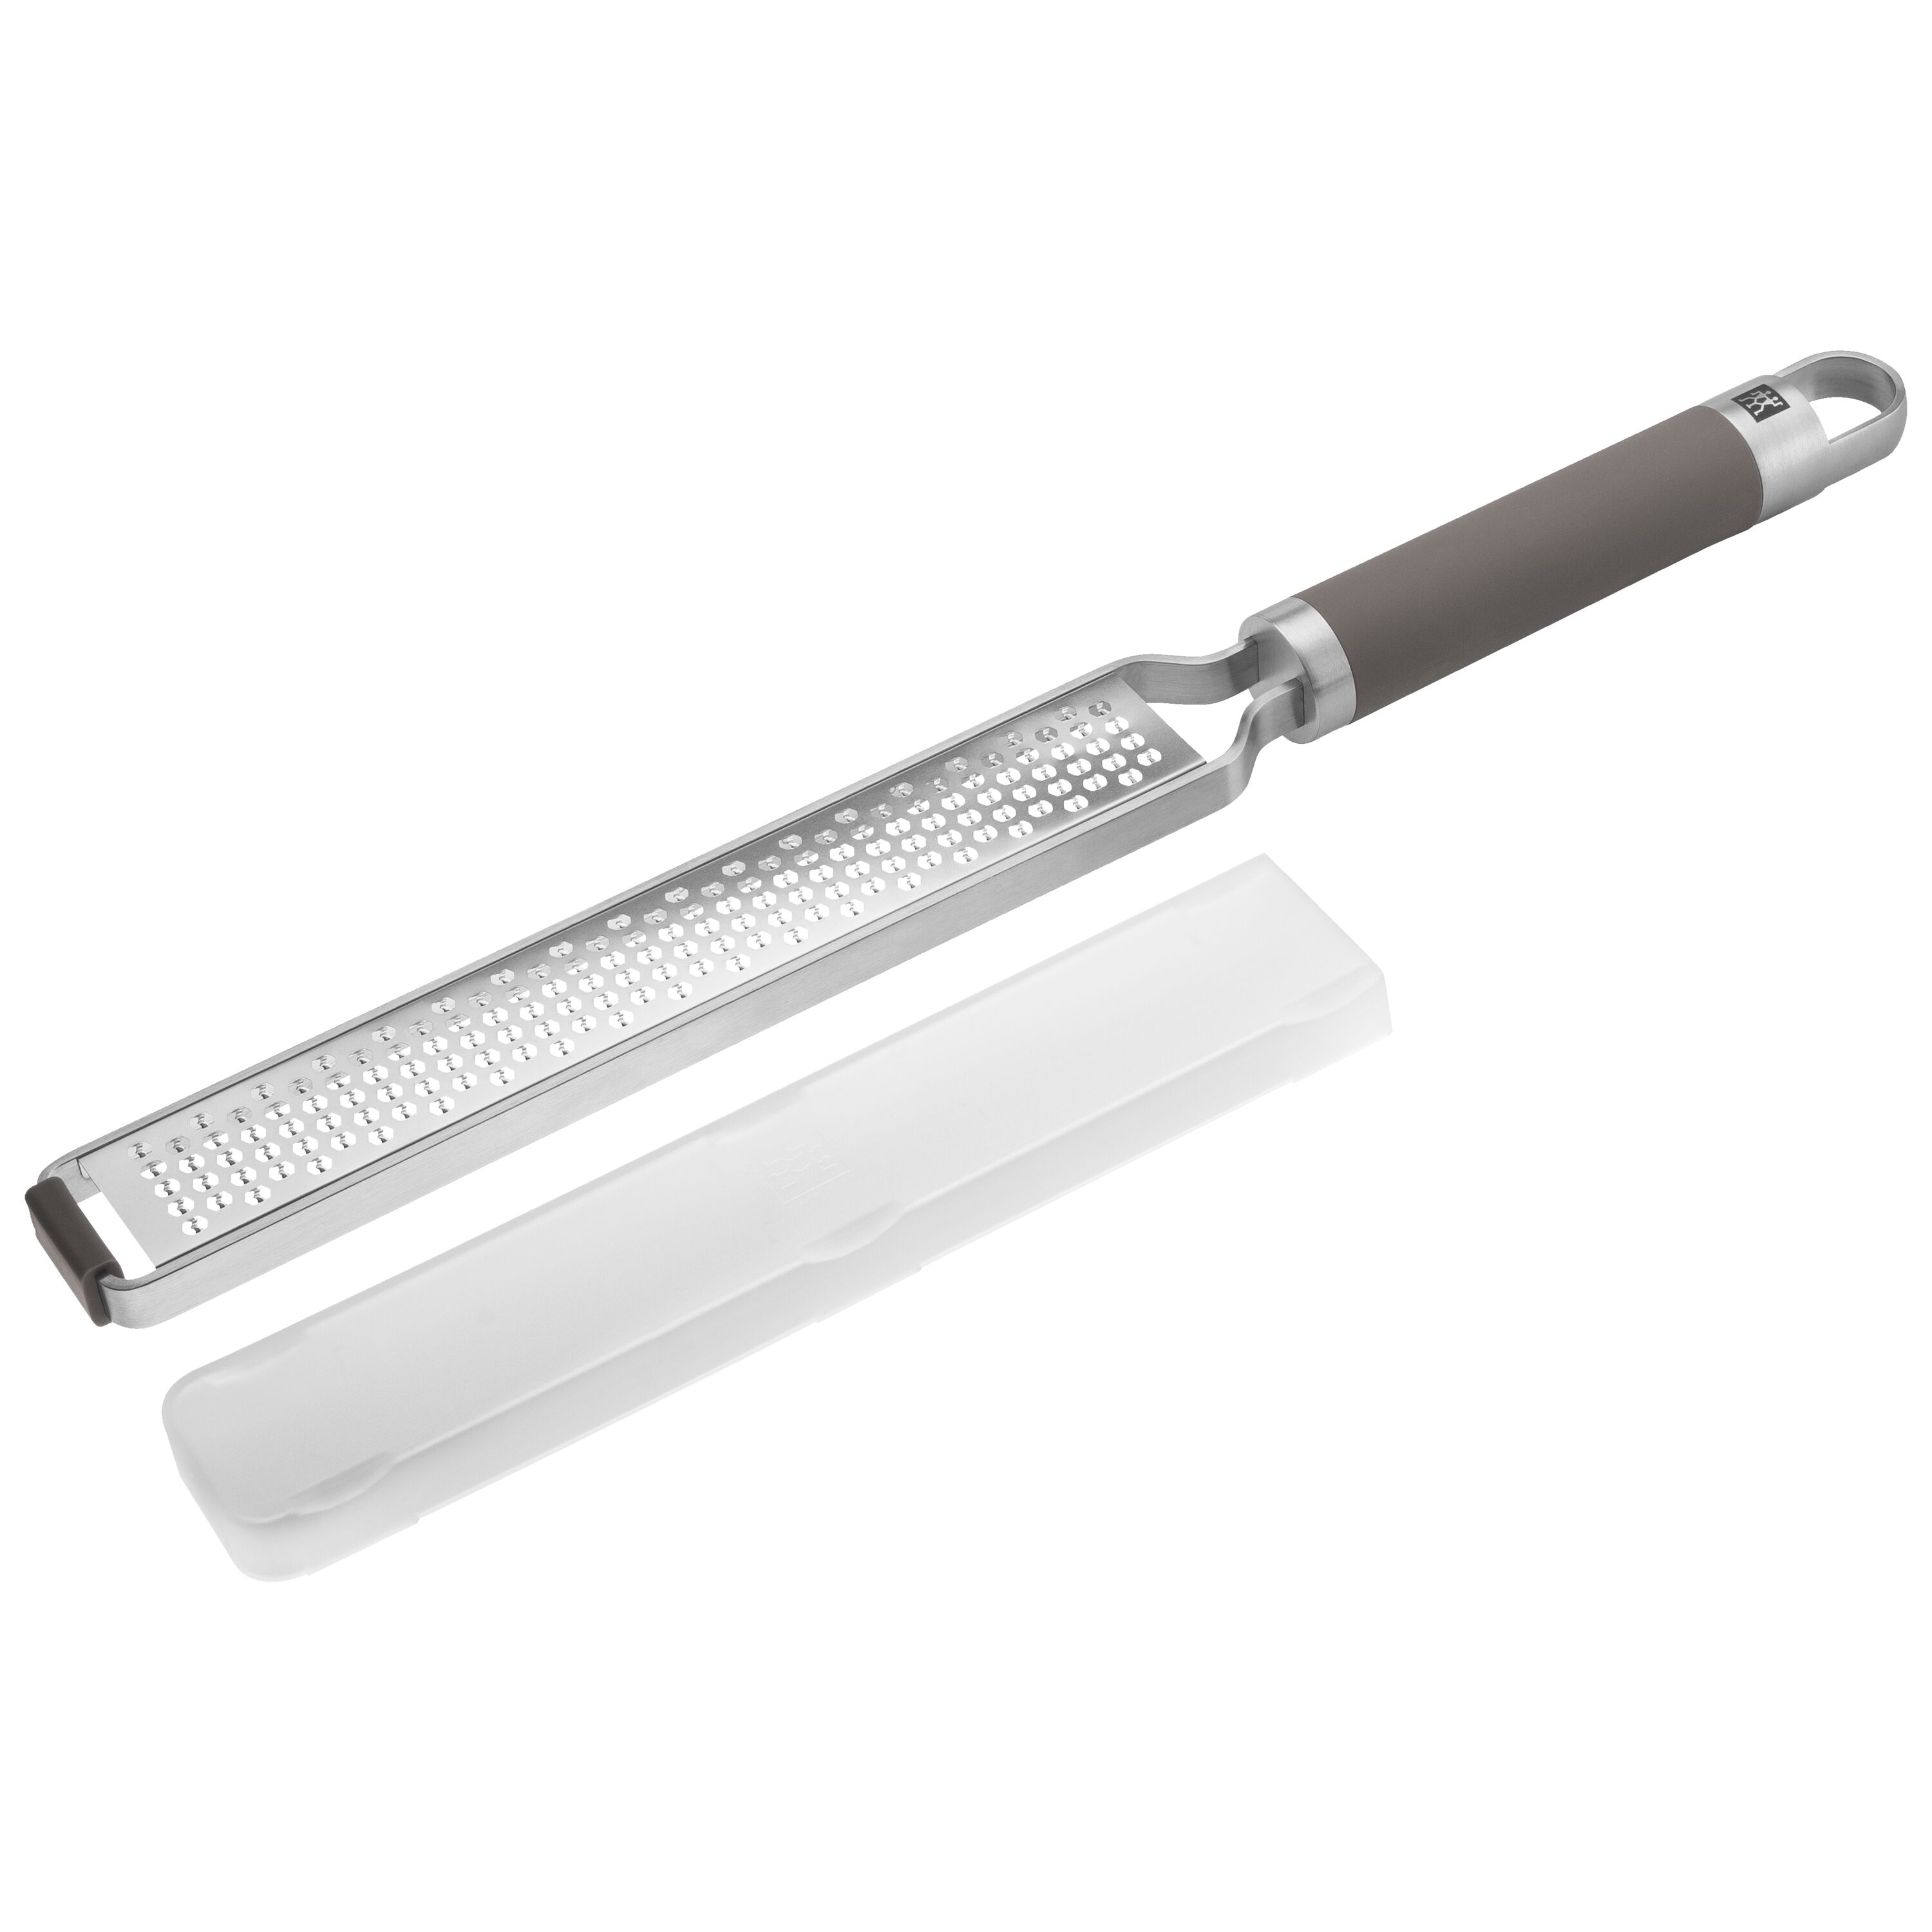 Artisan Stainless Steel Lemon Zester - Cheese Grater - Made in the